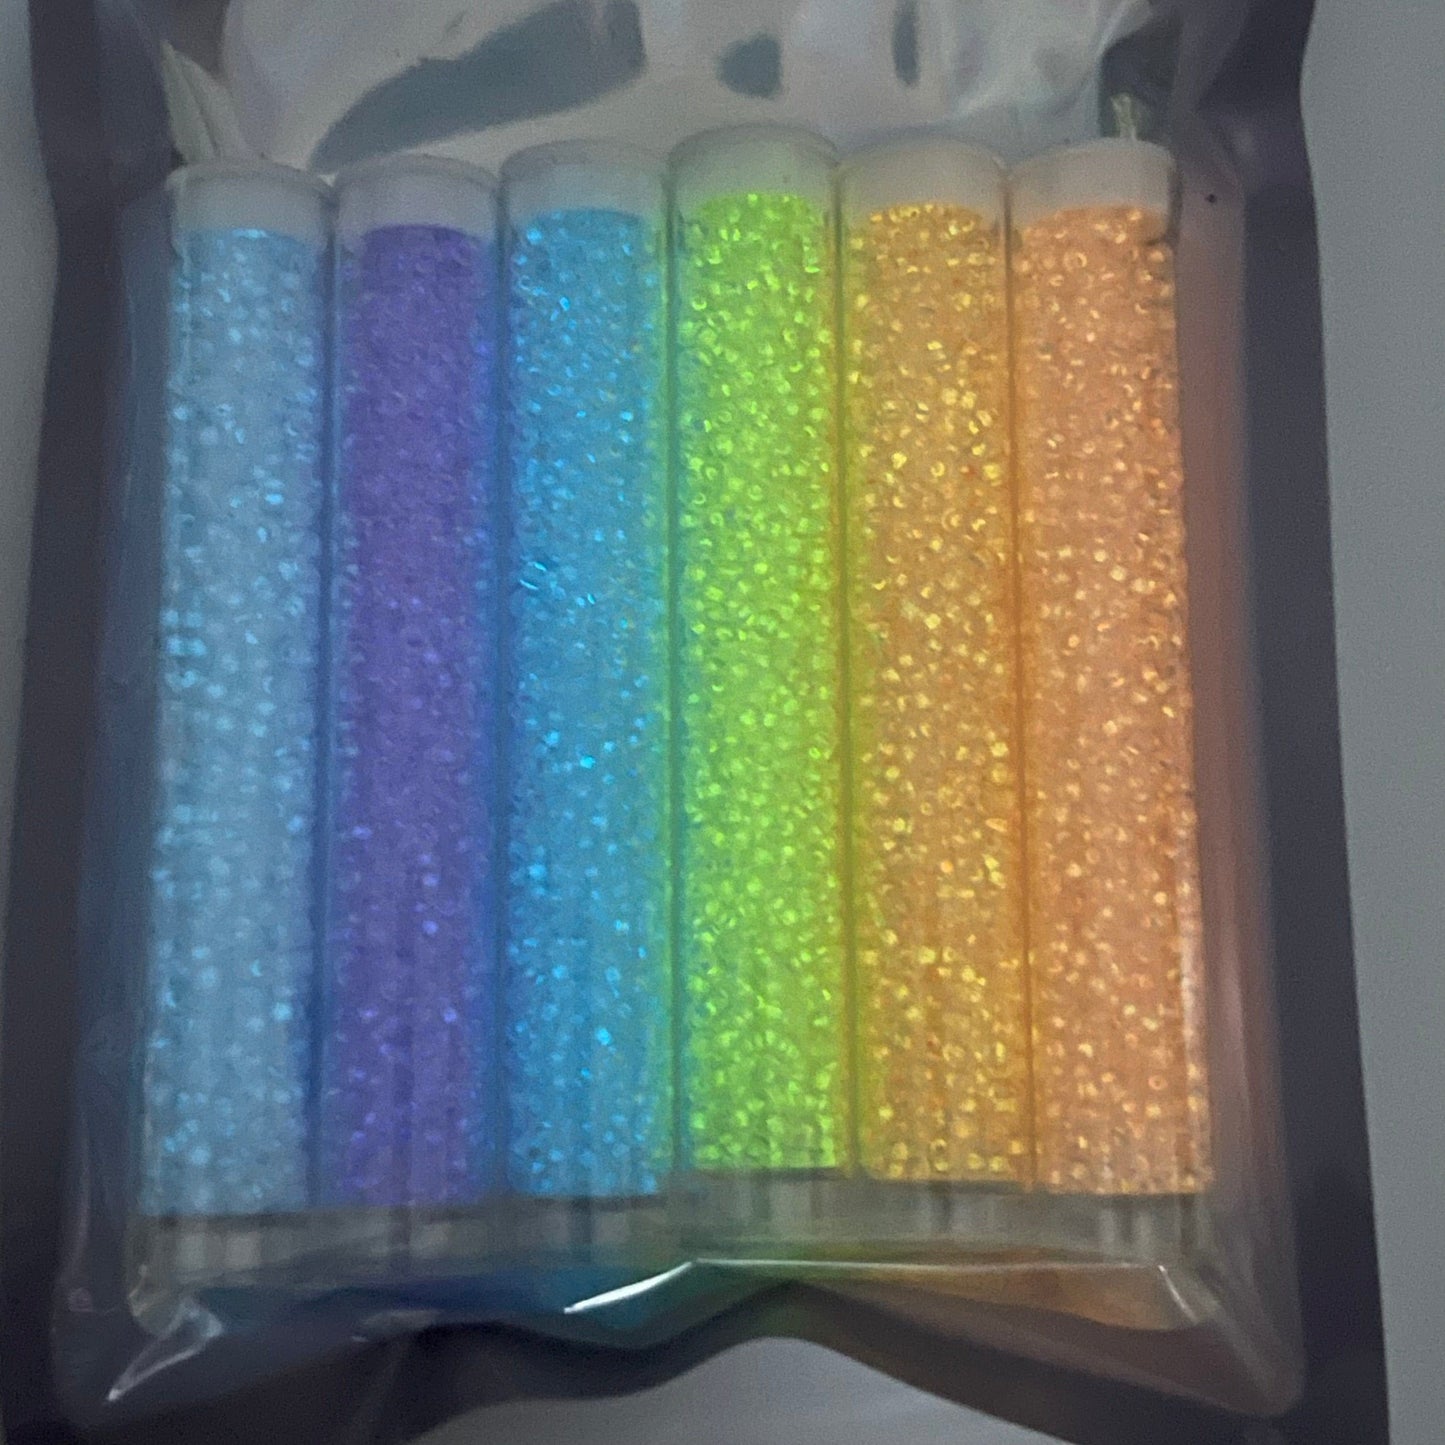 NEON GLOW IN DARK SET, 11/0 Seedbeads in 7g x 6 colours, BLACK FRIDAY PROMO Promotions